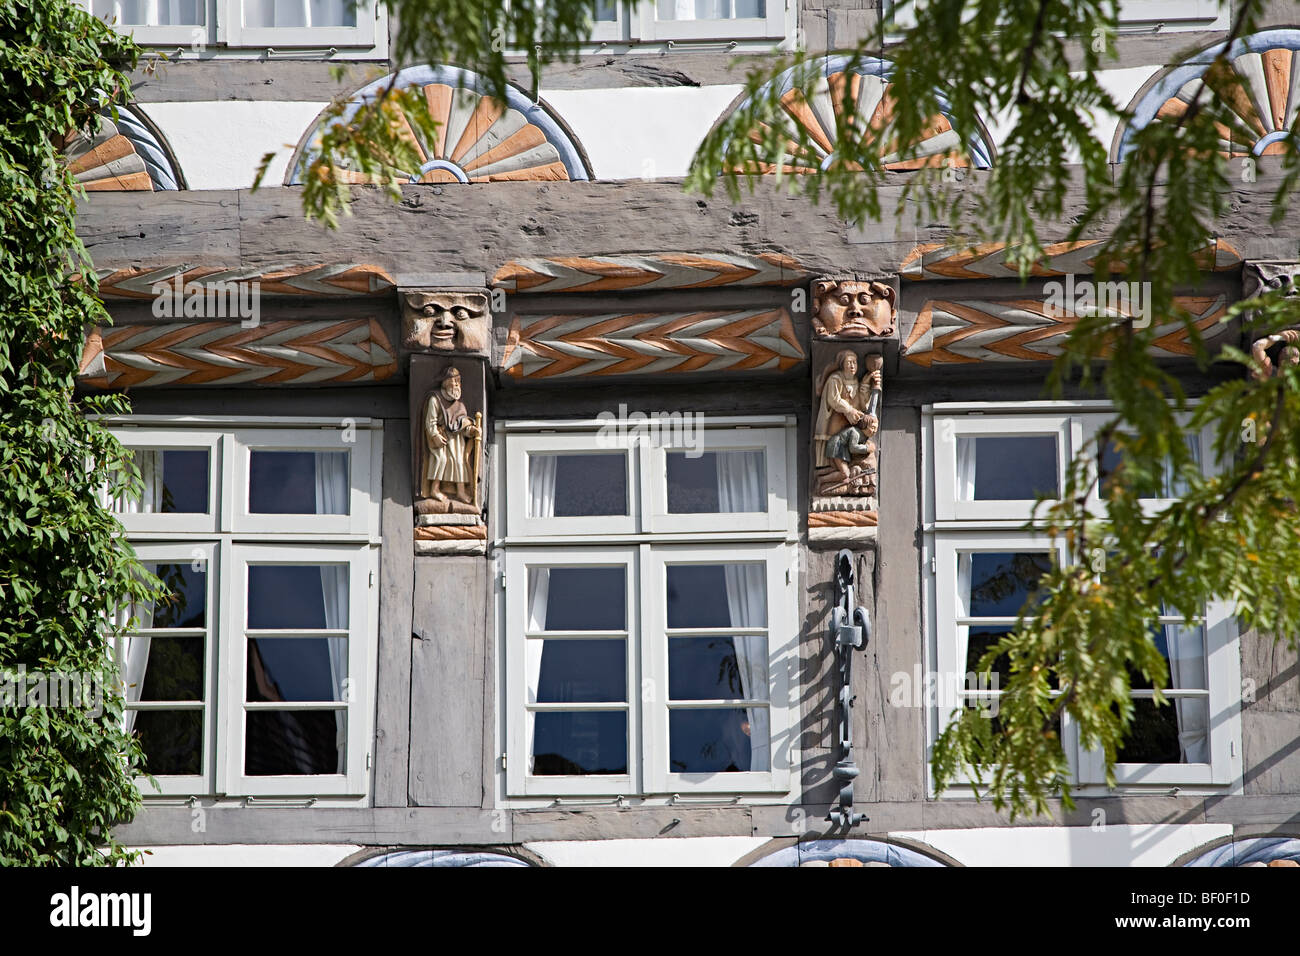 Faces carved into the Stiftsherrenhaus or Capitular's House Hamelin Germany Stock Photo